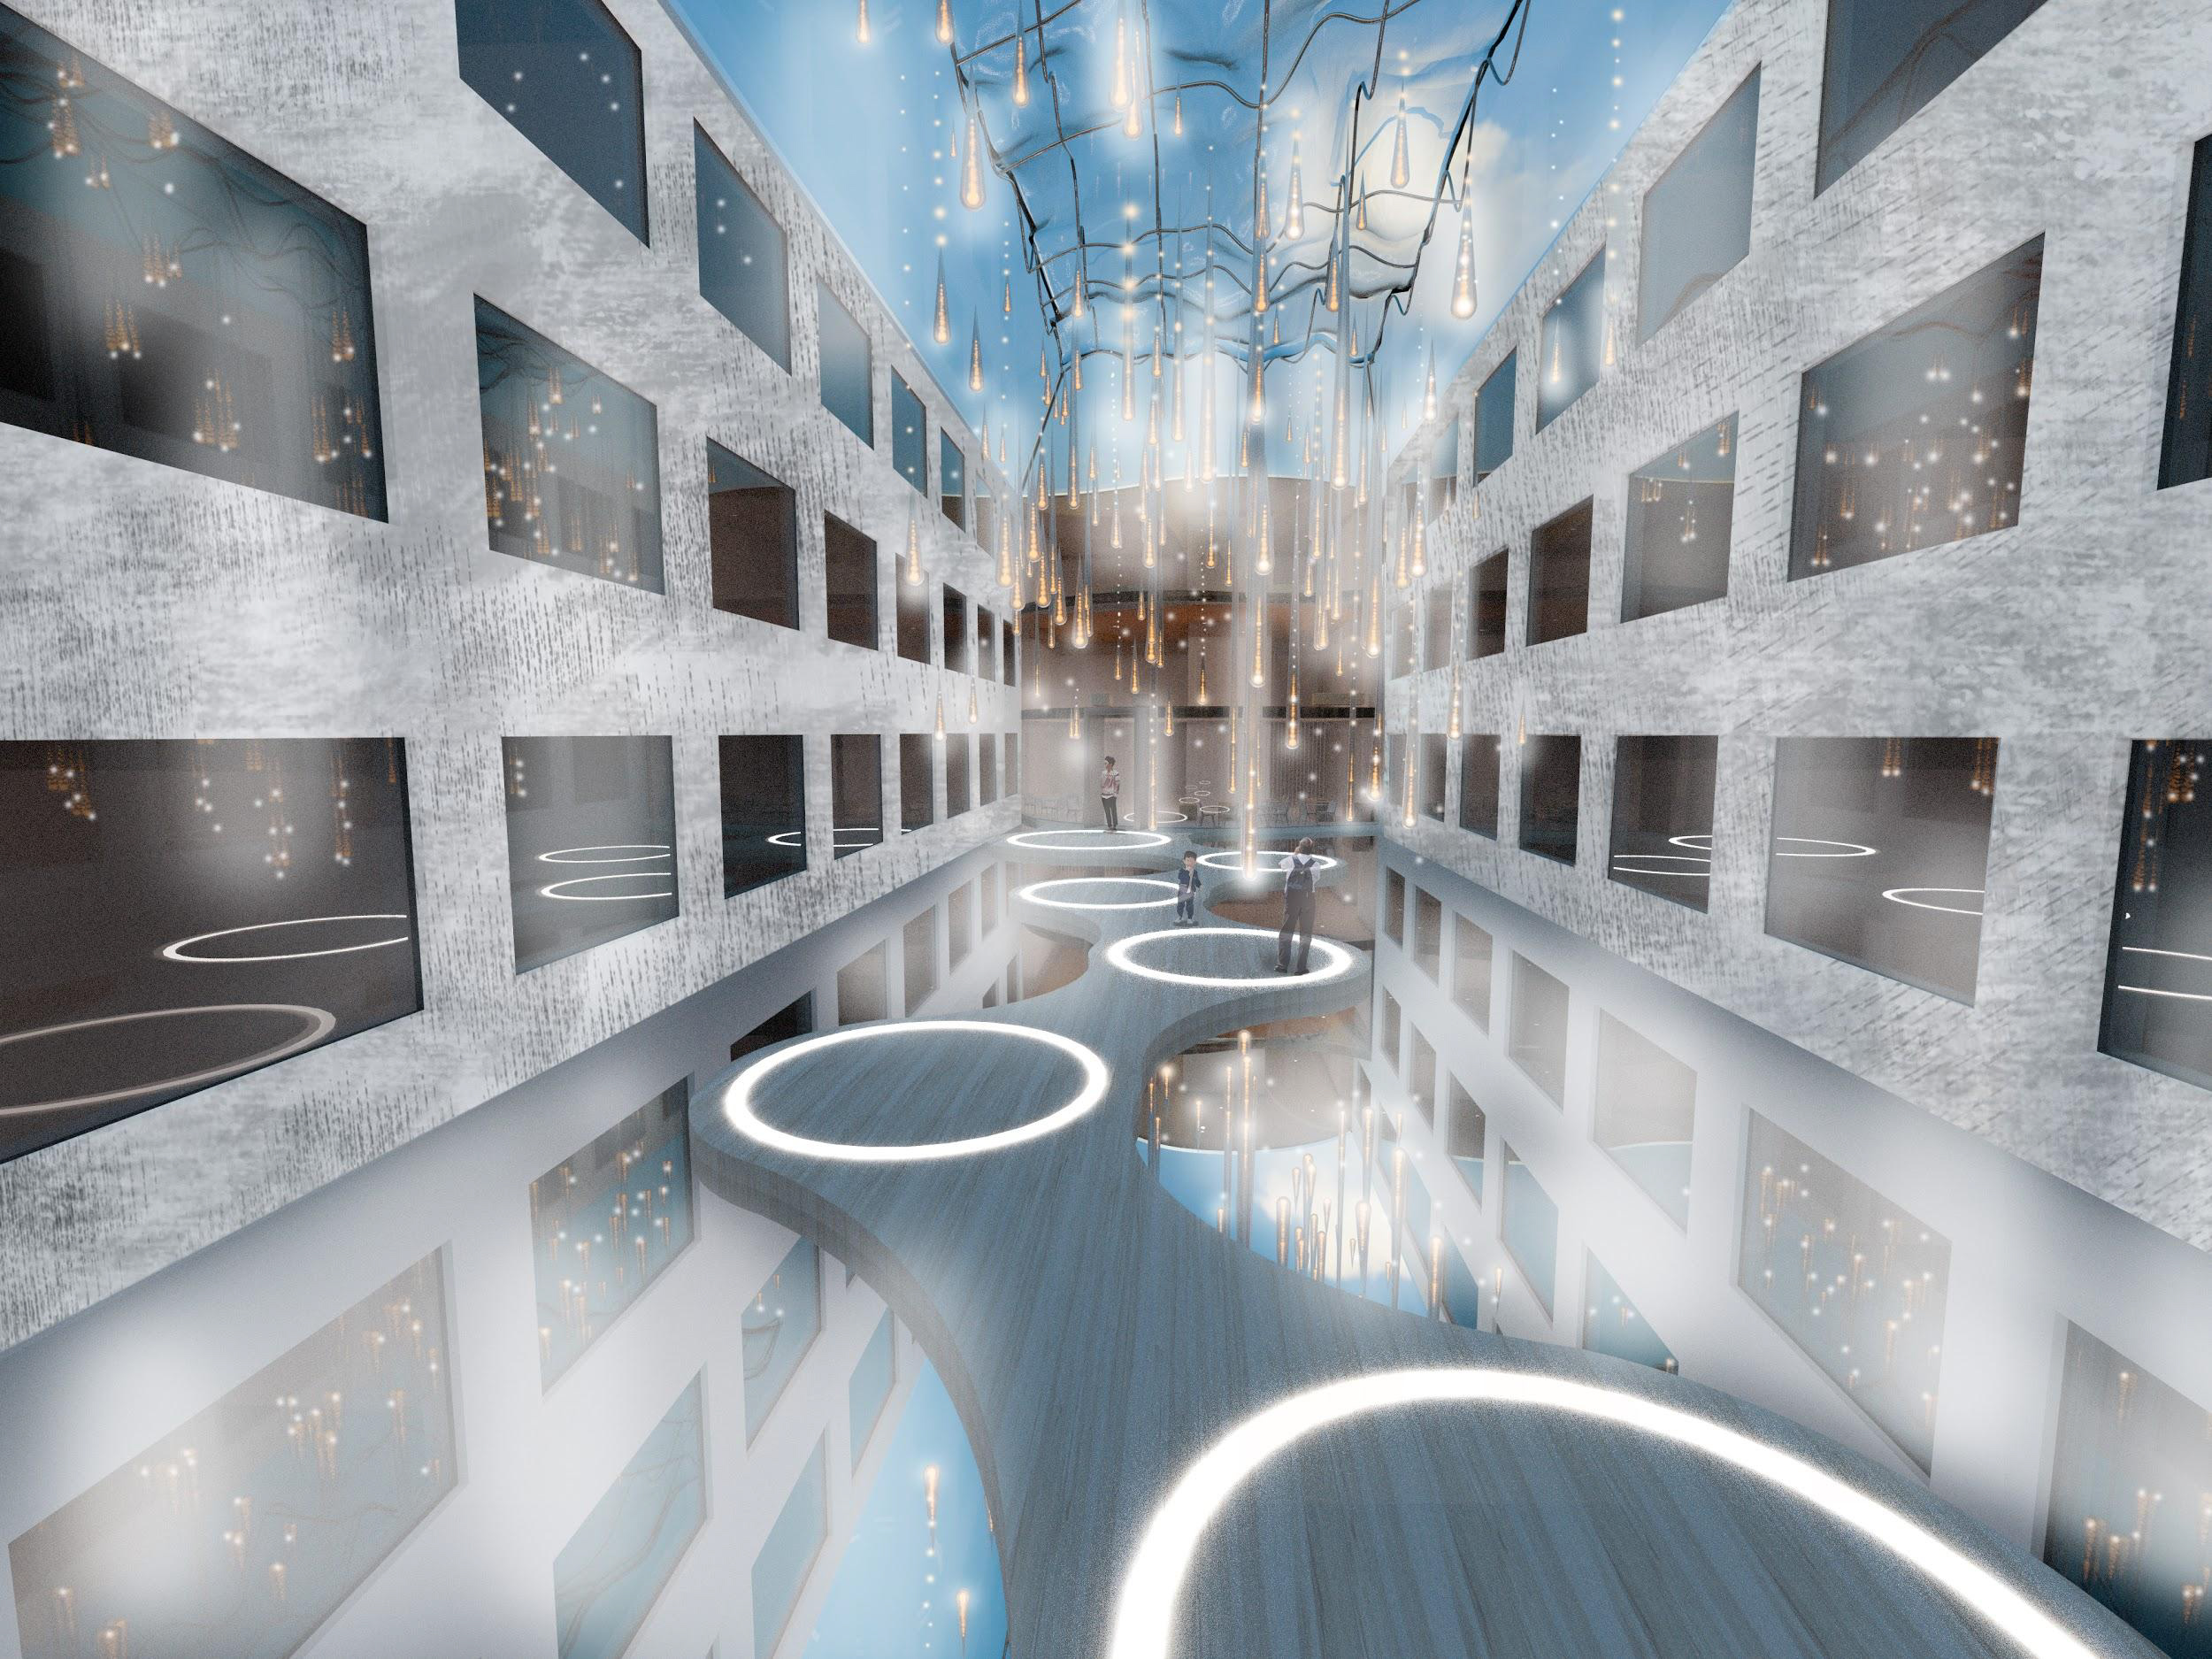 Atrium design by Angel Chen and Jim Huang